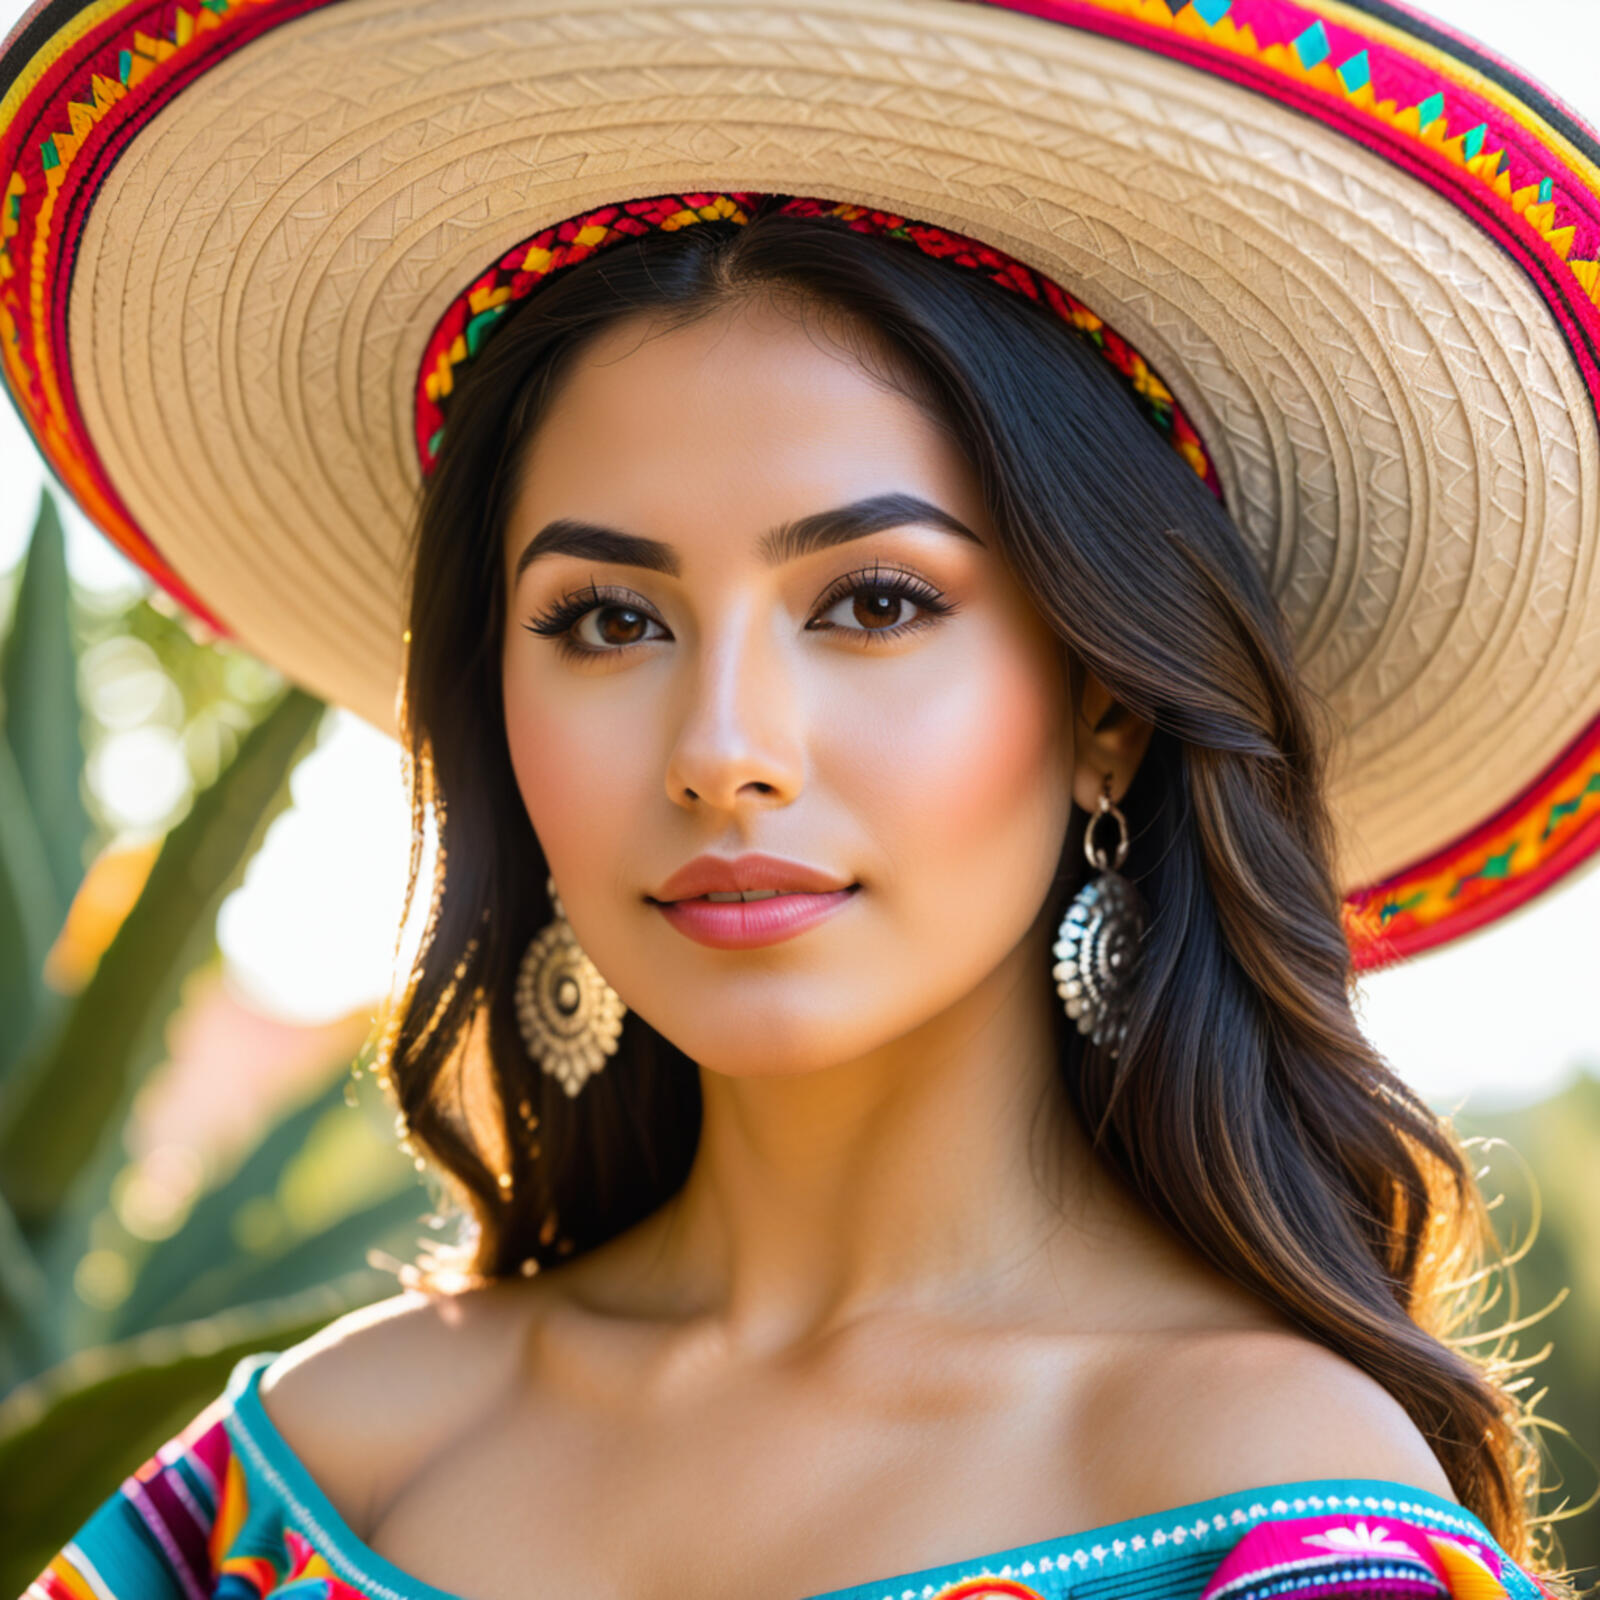 Free photo A Mexican woman in a sombrero